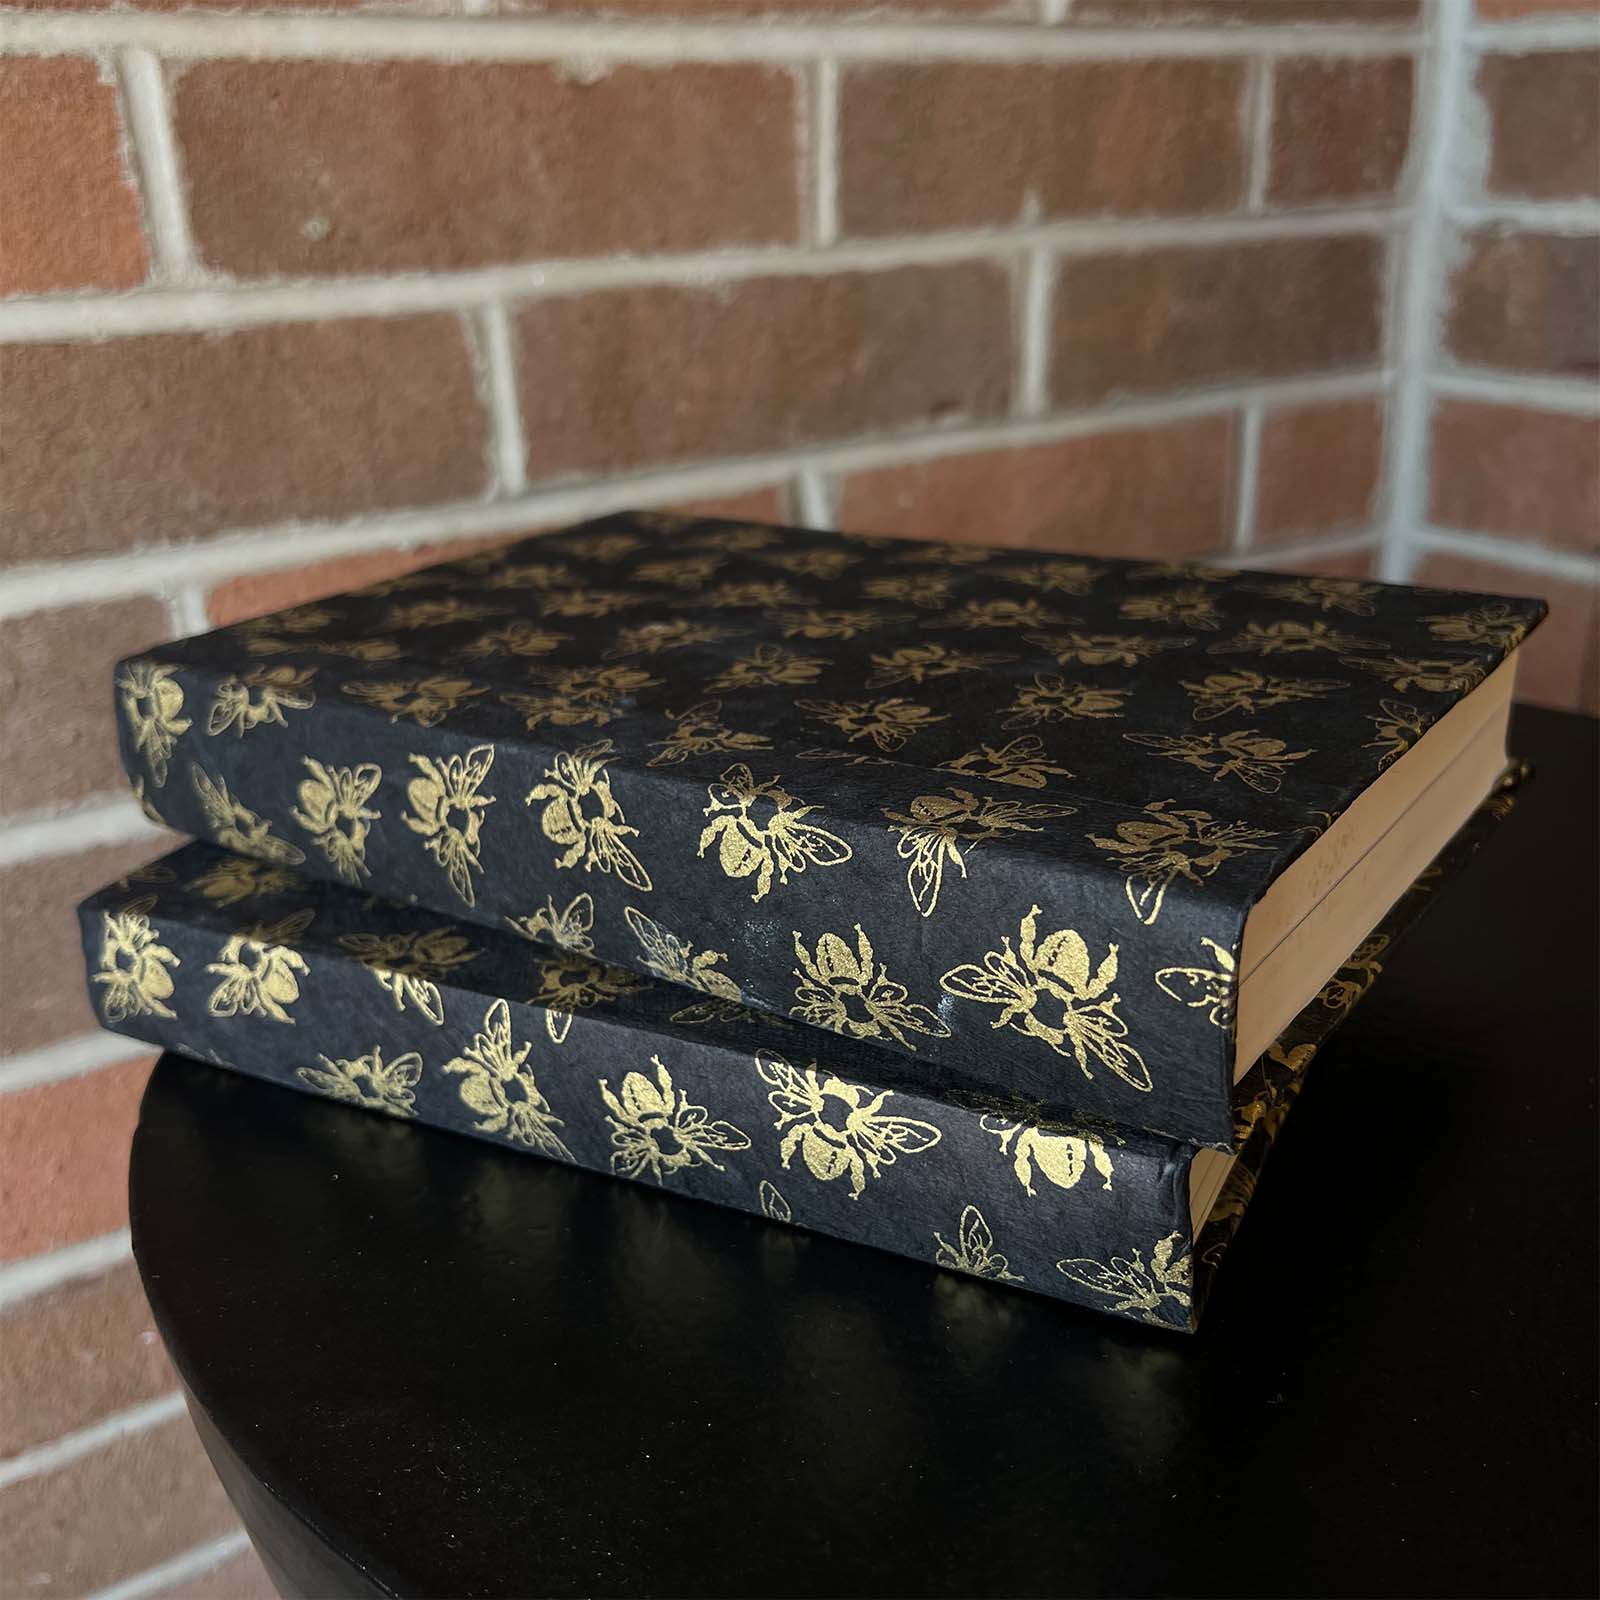 Book - Gold Bees on Black